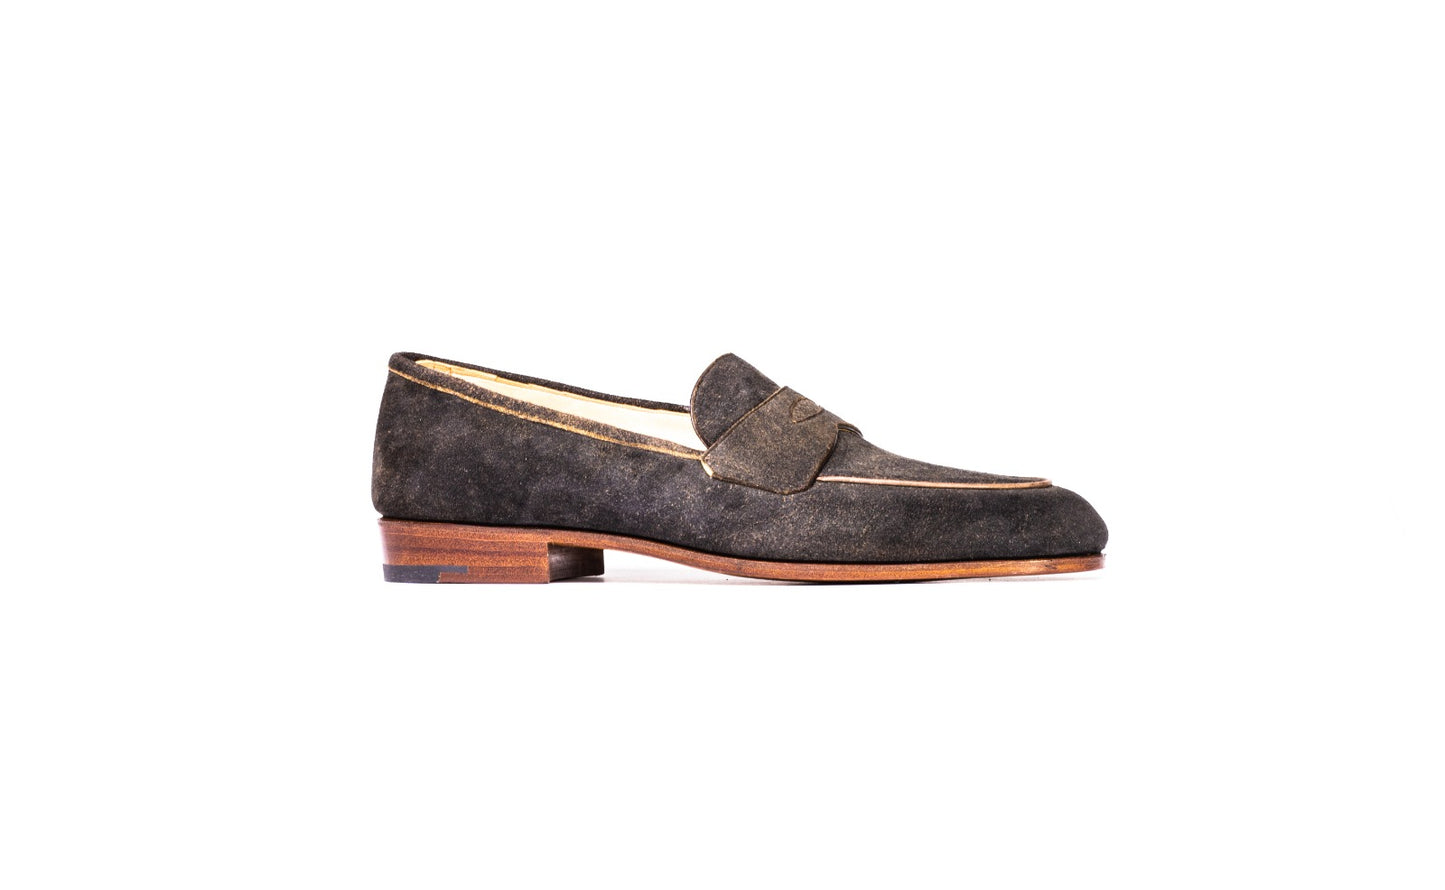 Lined but unconstructed summer Loafer